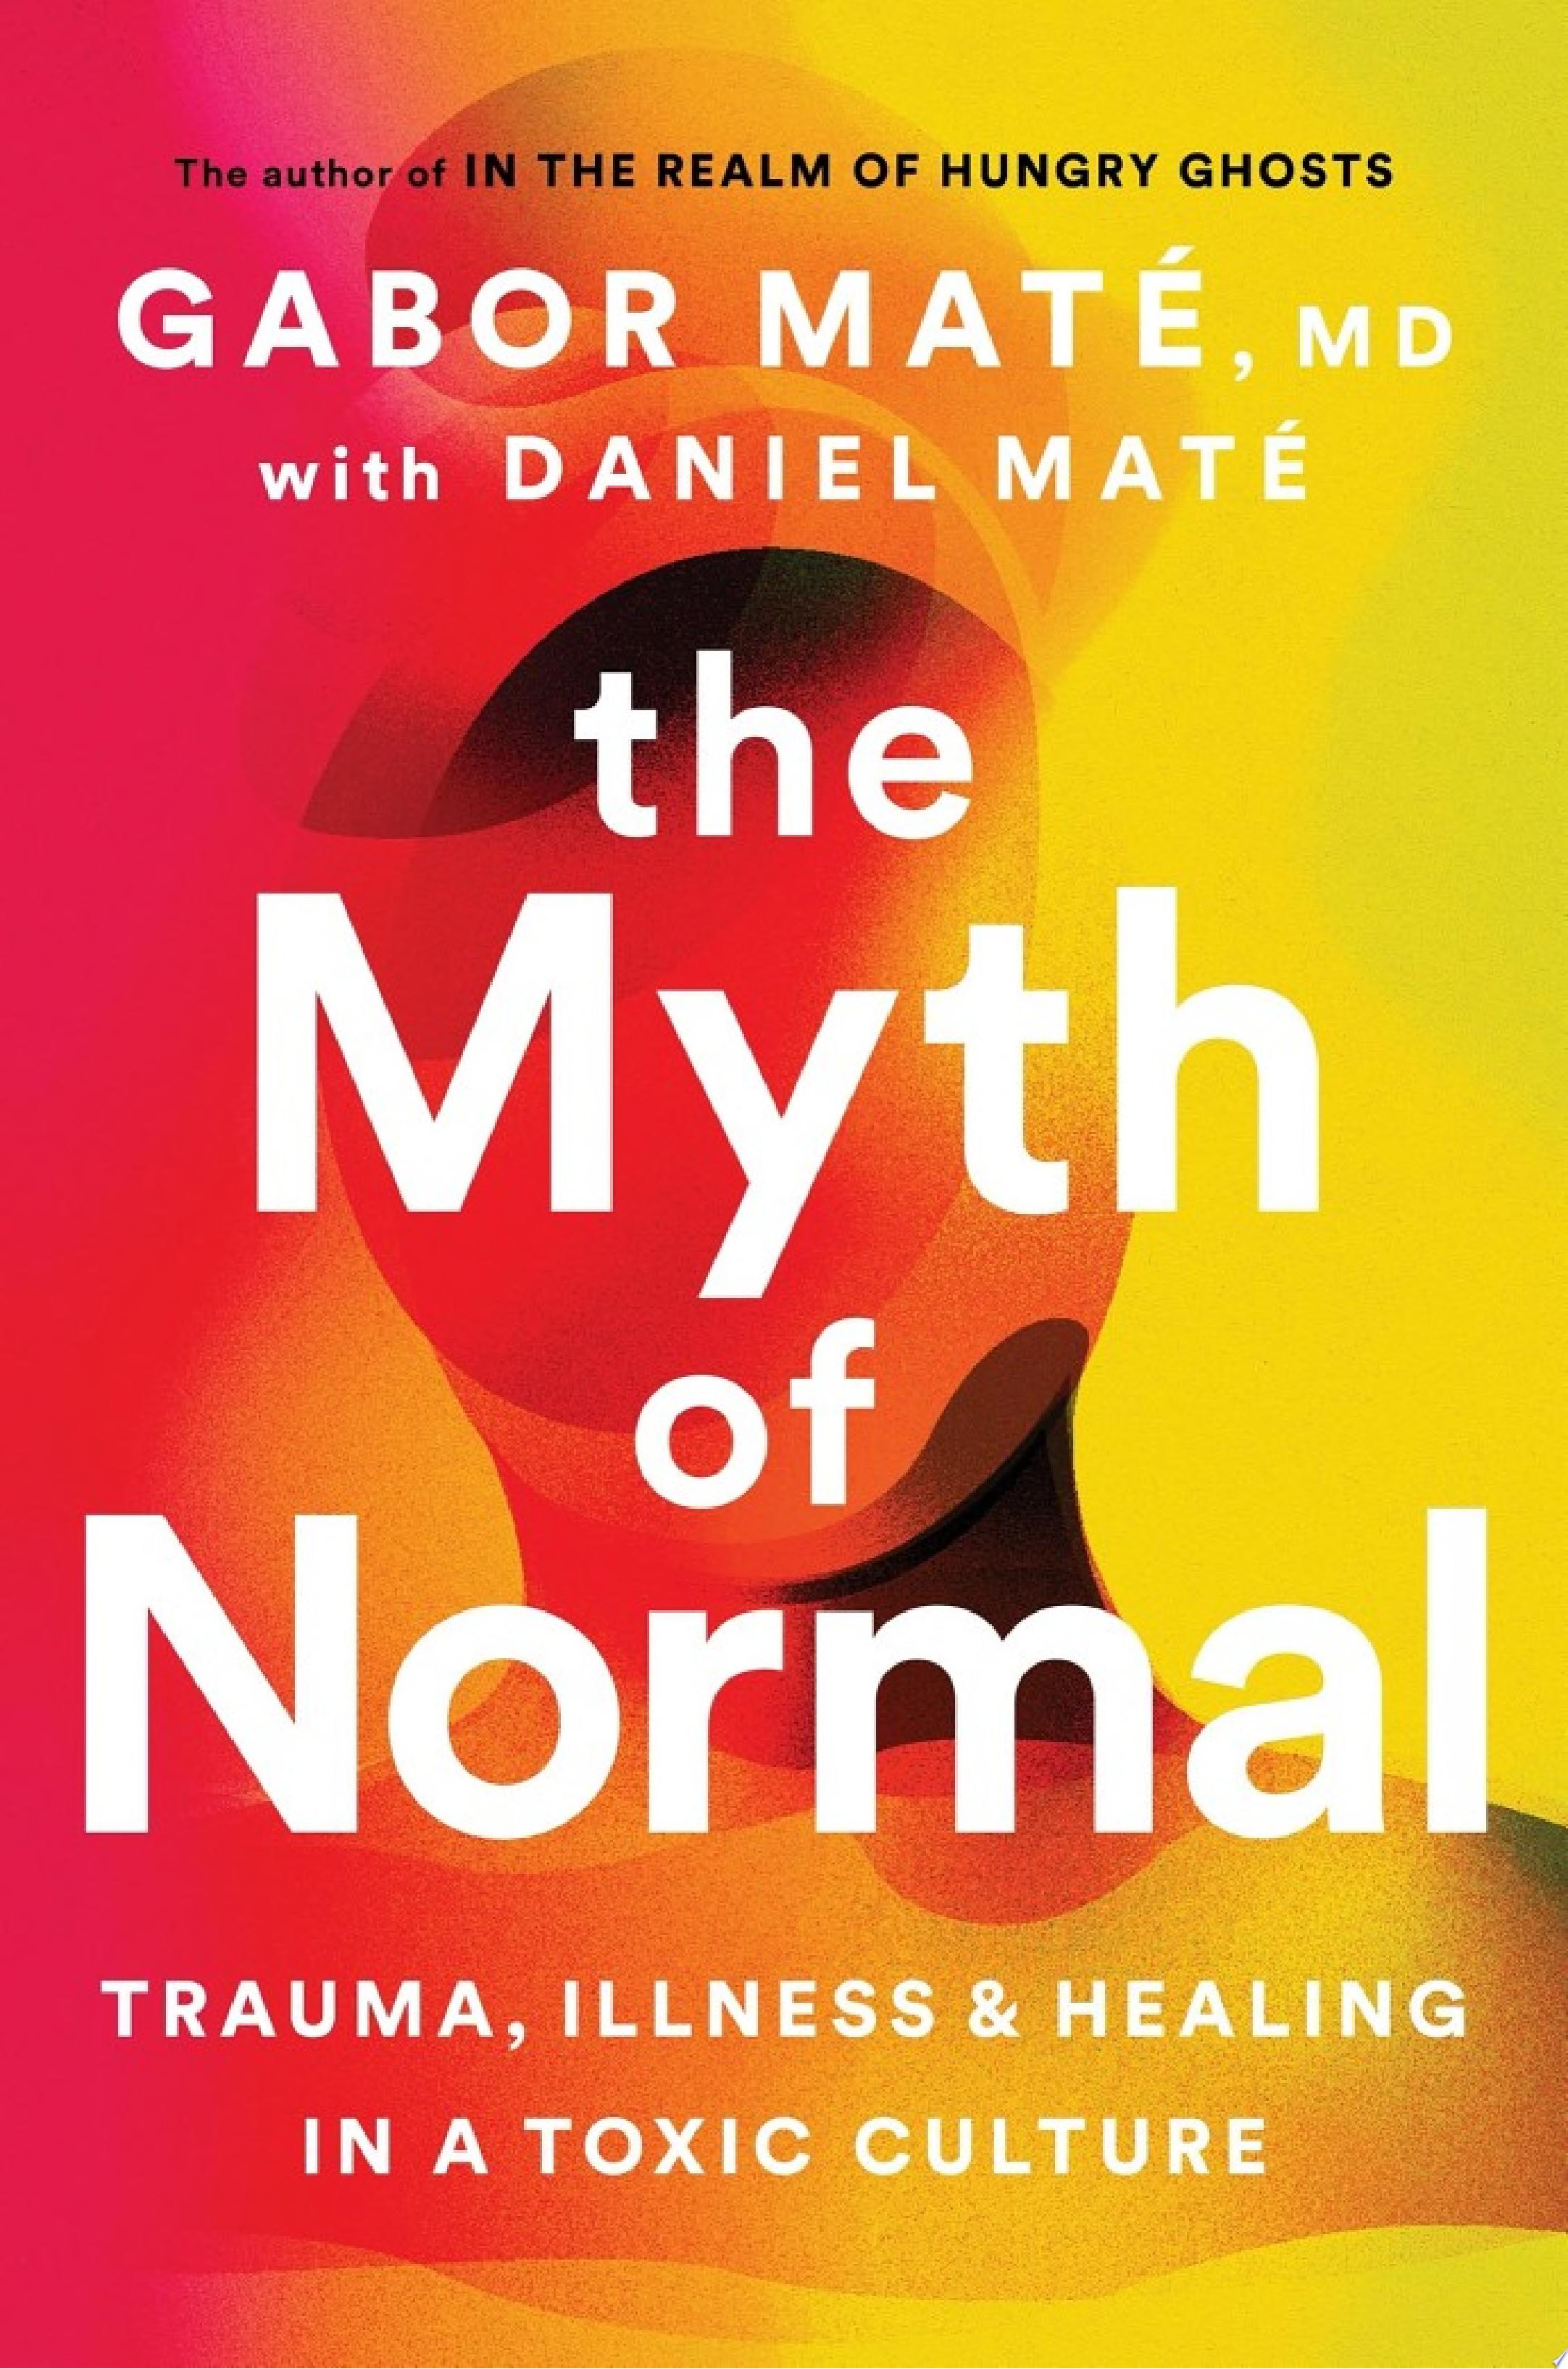 Image for "The Myth of Normal"